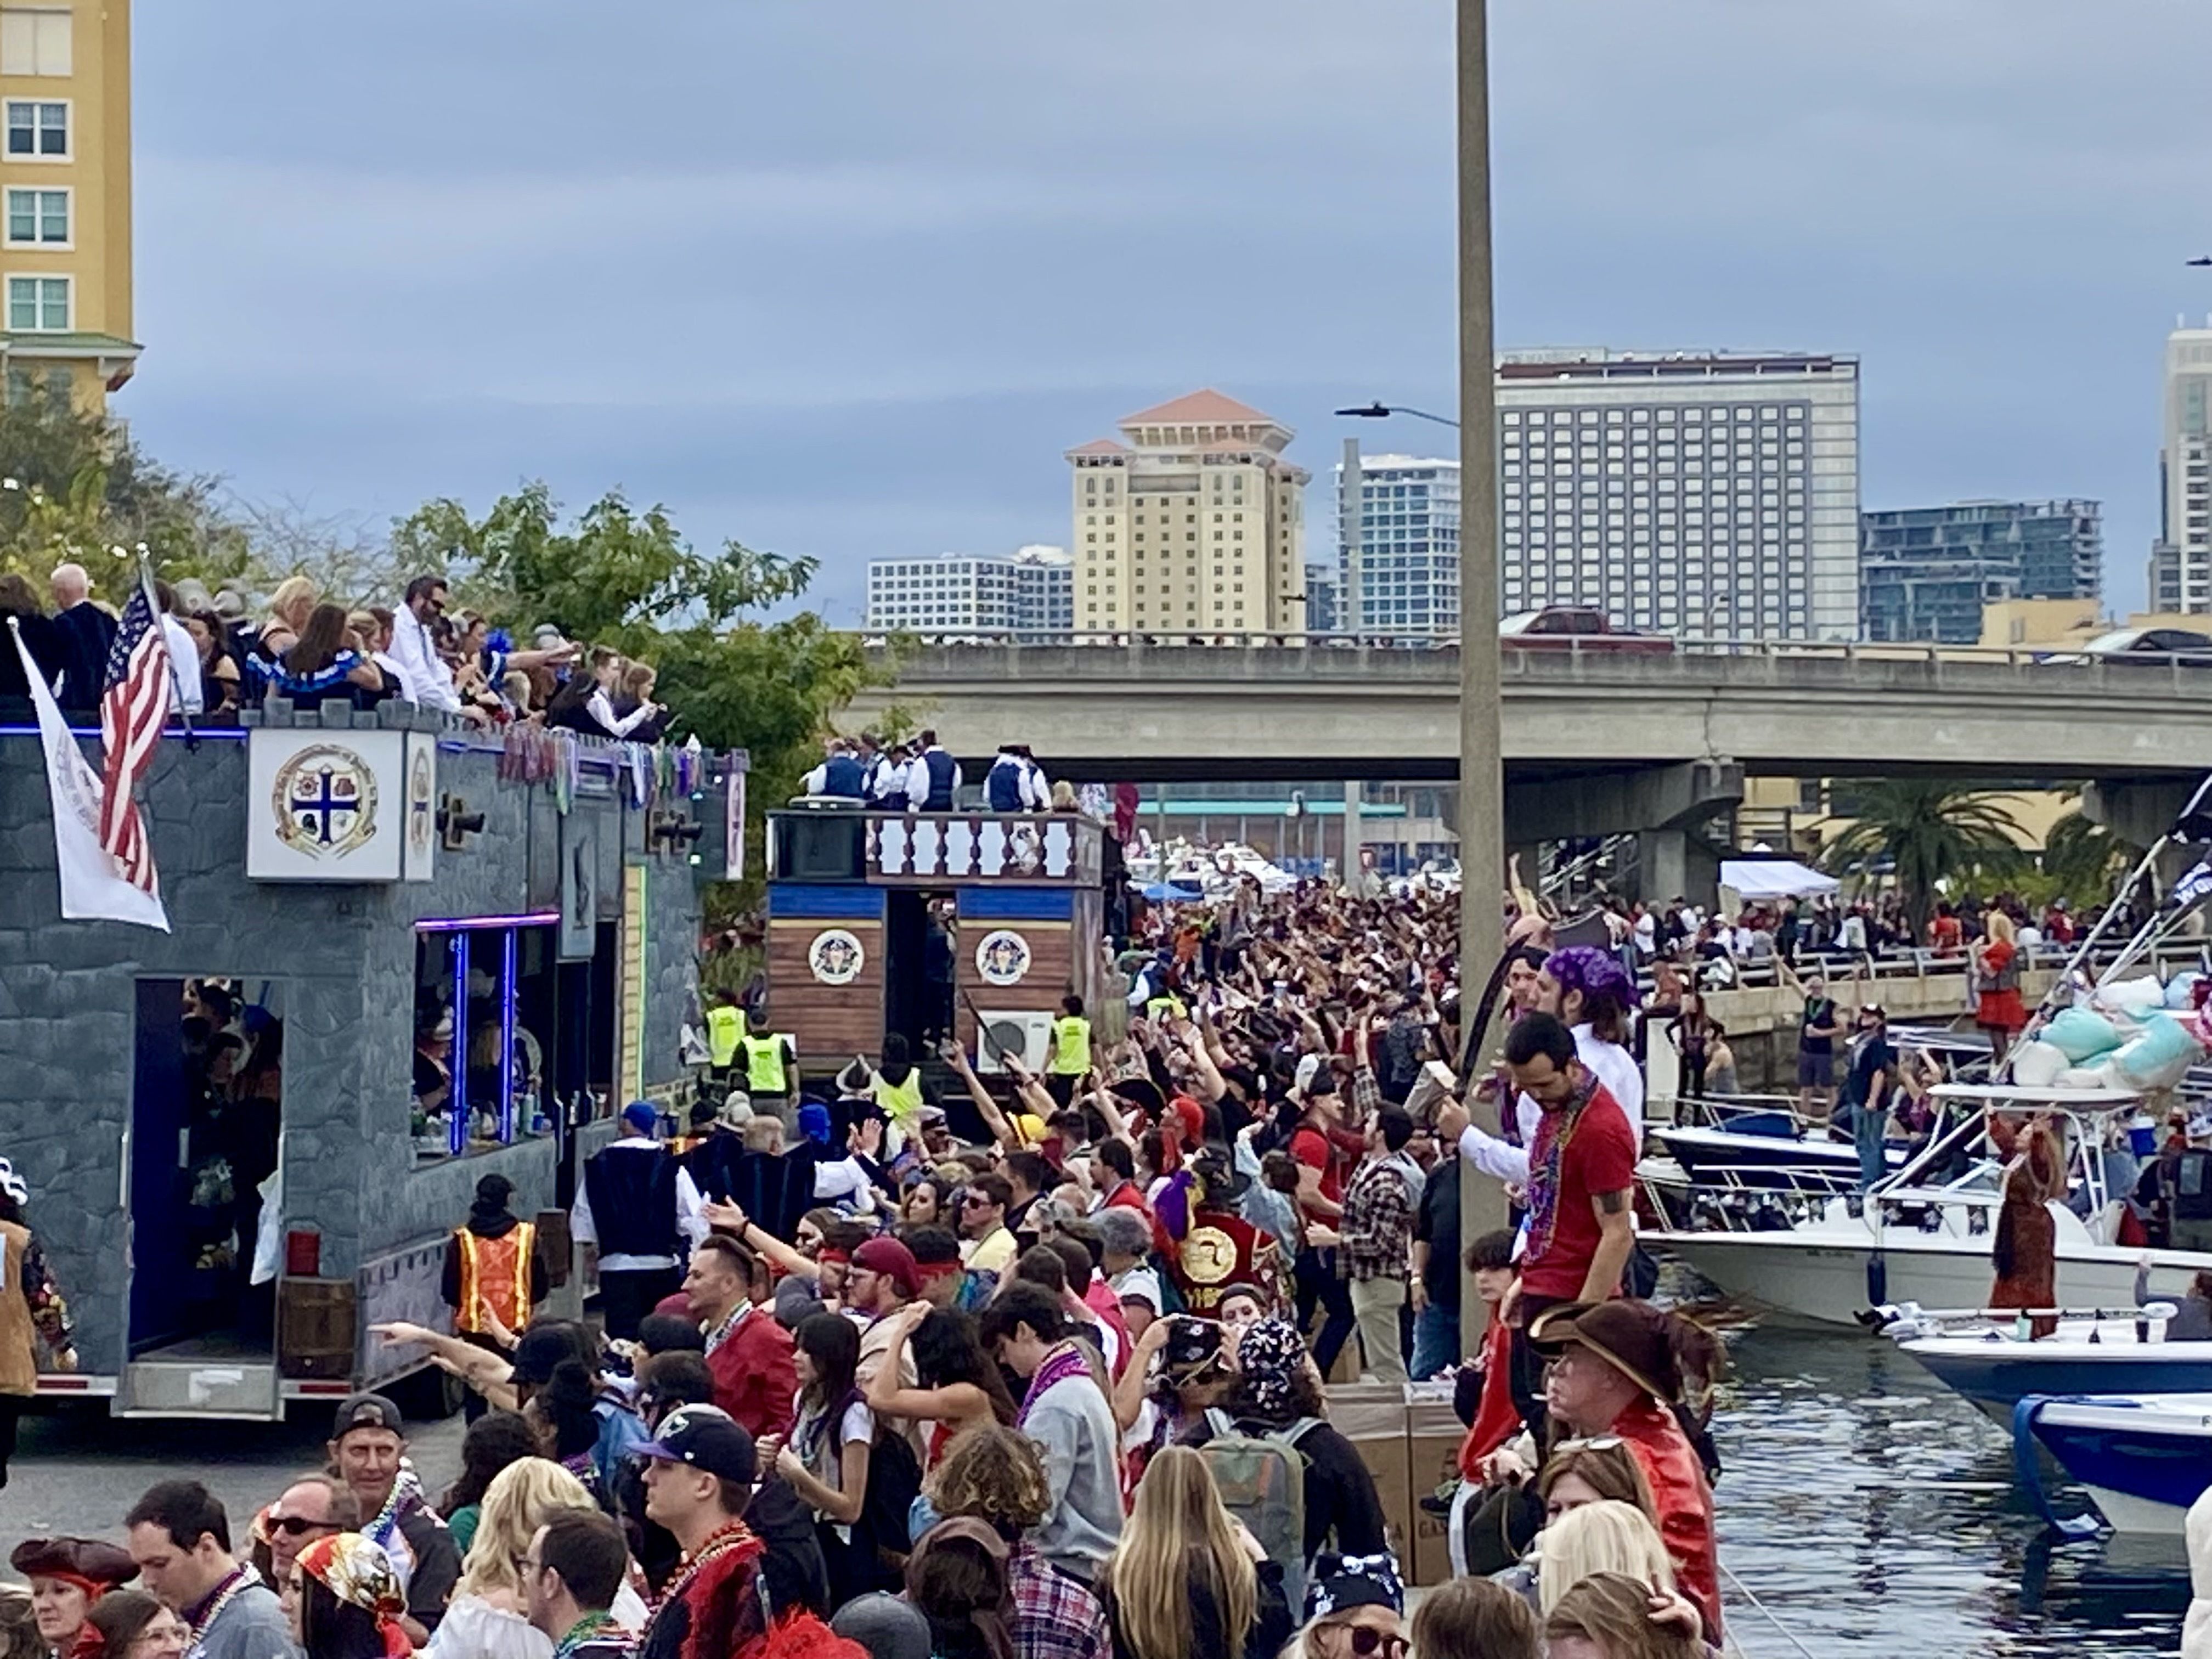 People at the Gasparilla fest reach for beads.